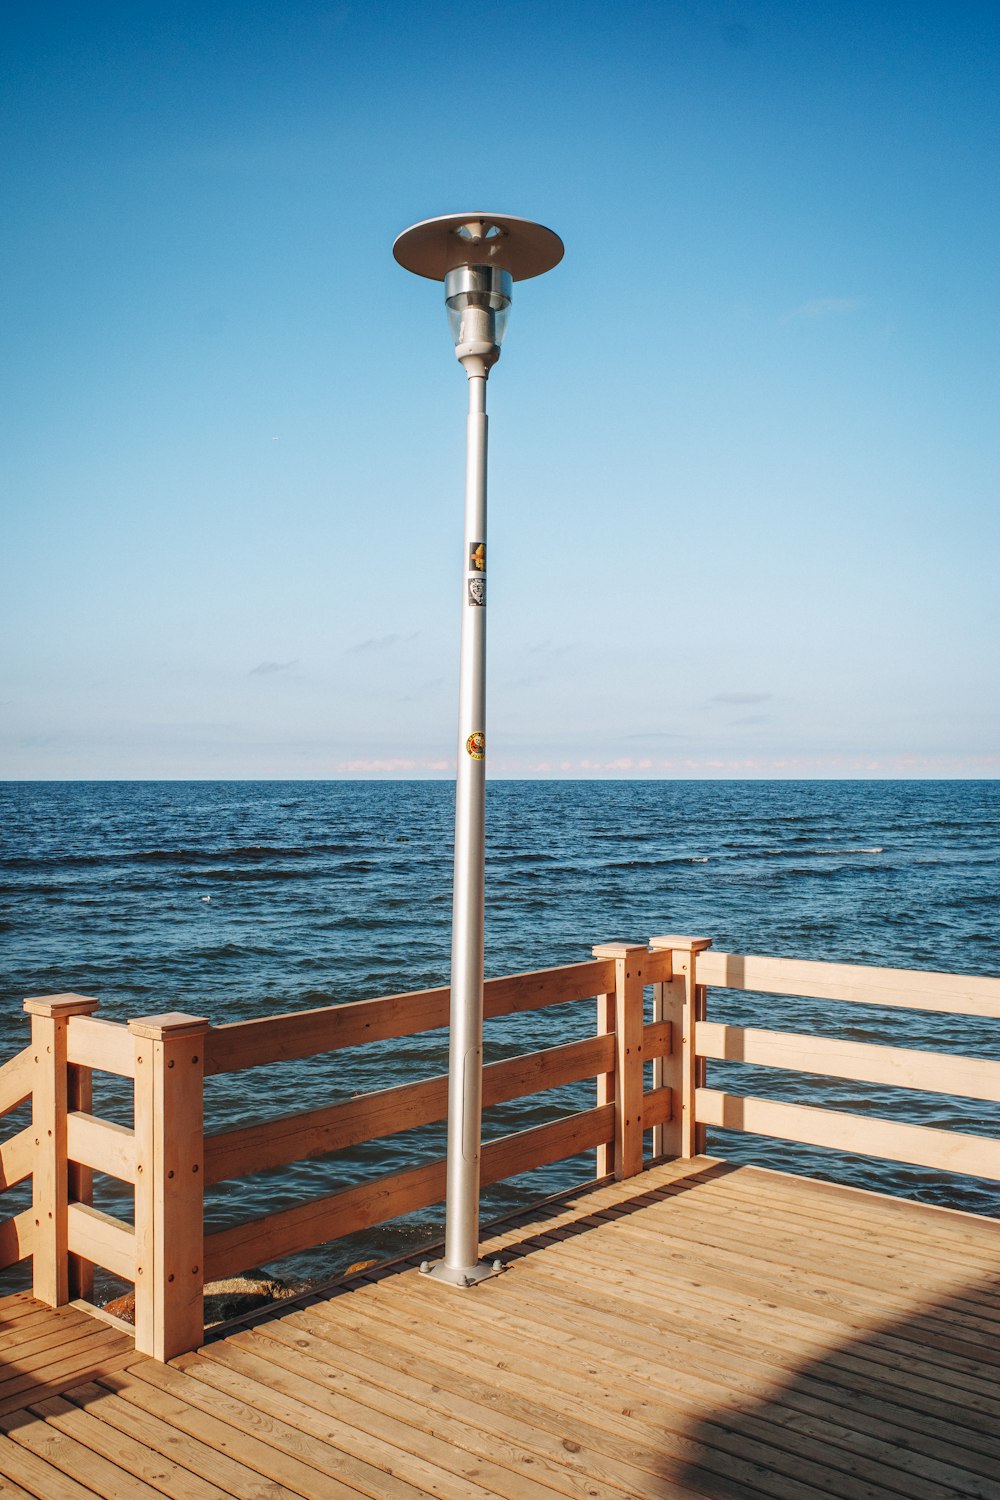 a lamp post on a wooden deck overlooking the ocean